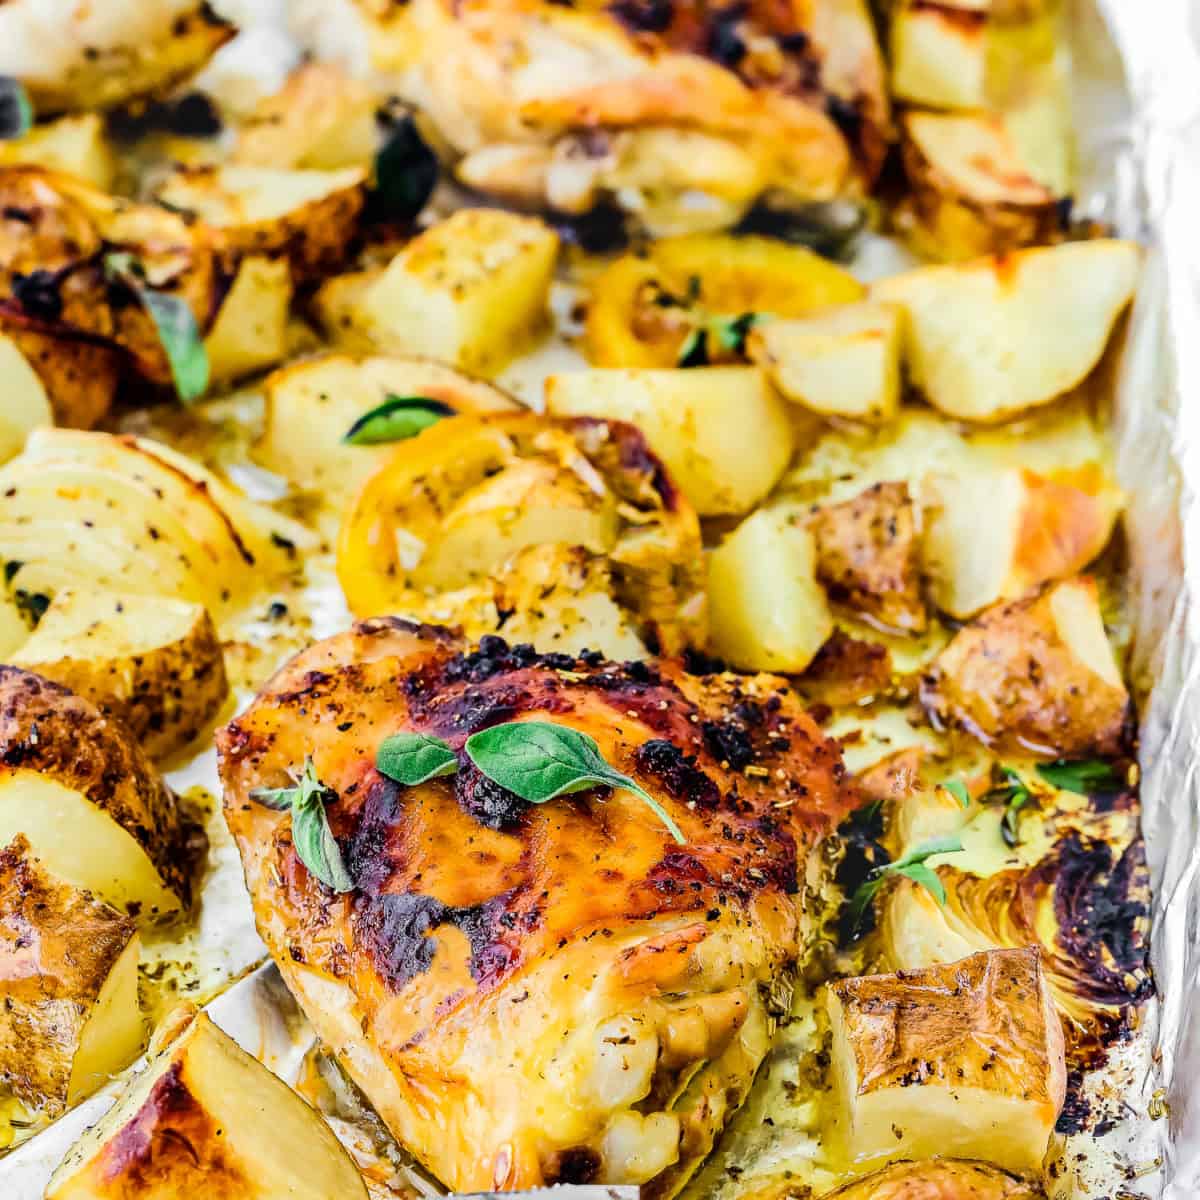 Sheet Pan Lemon Garlic Roasted Chicken and Potatoes - Mommy's Home Cooking